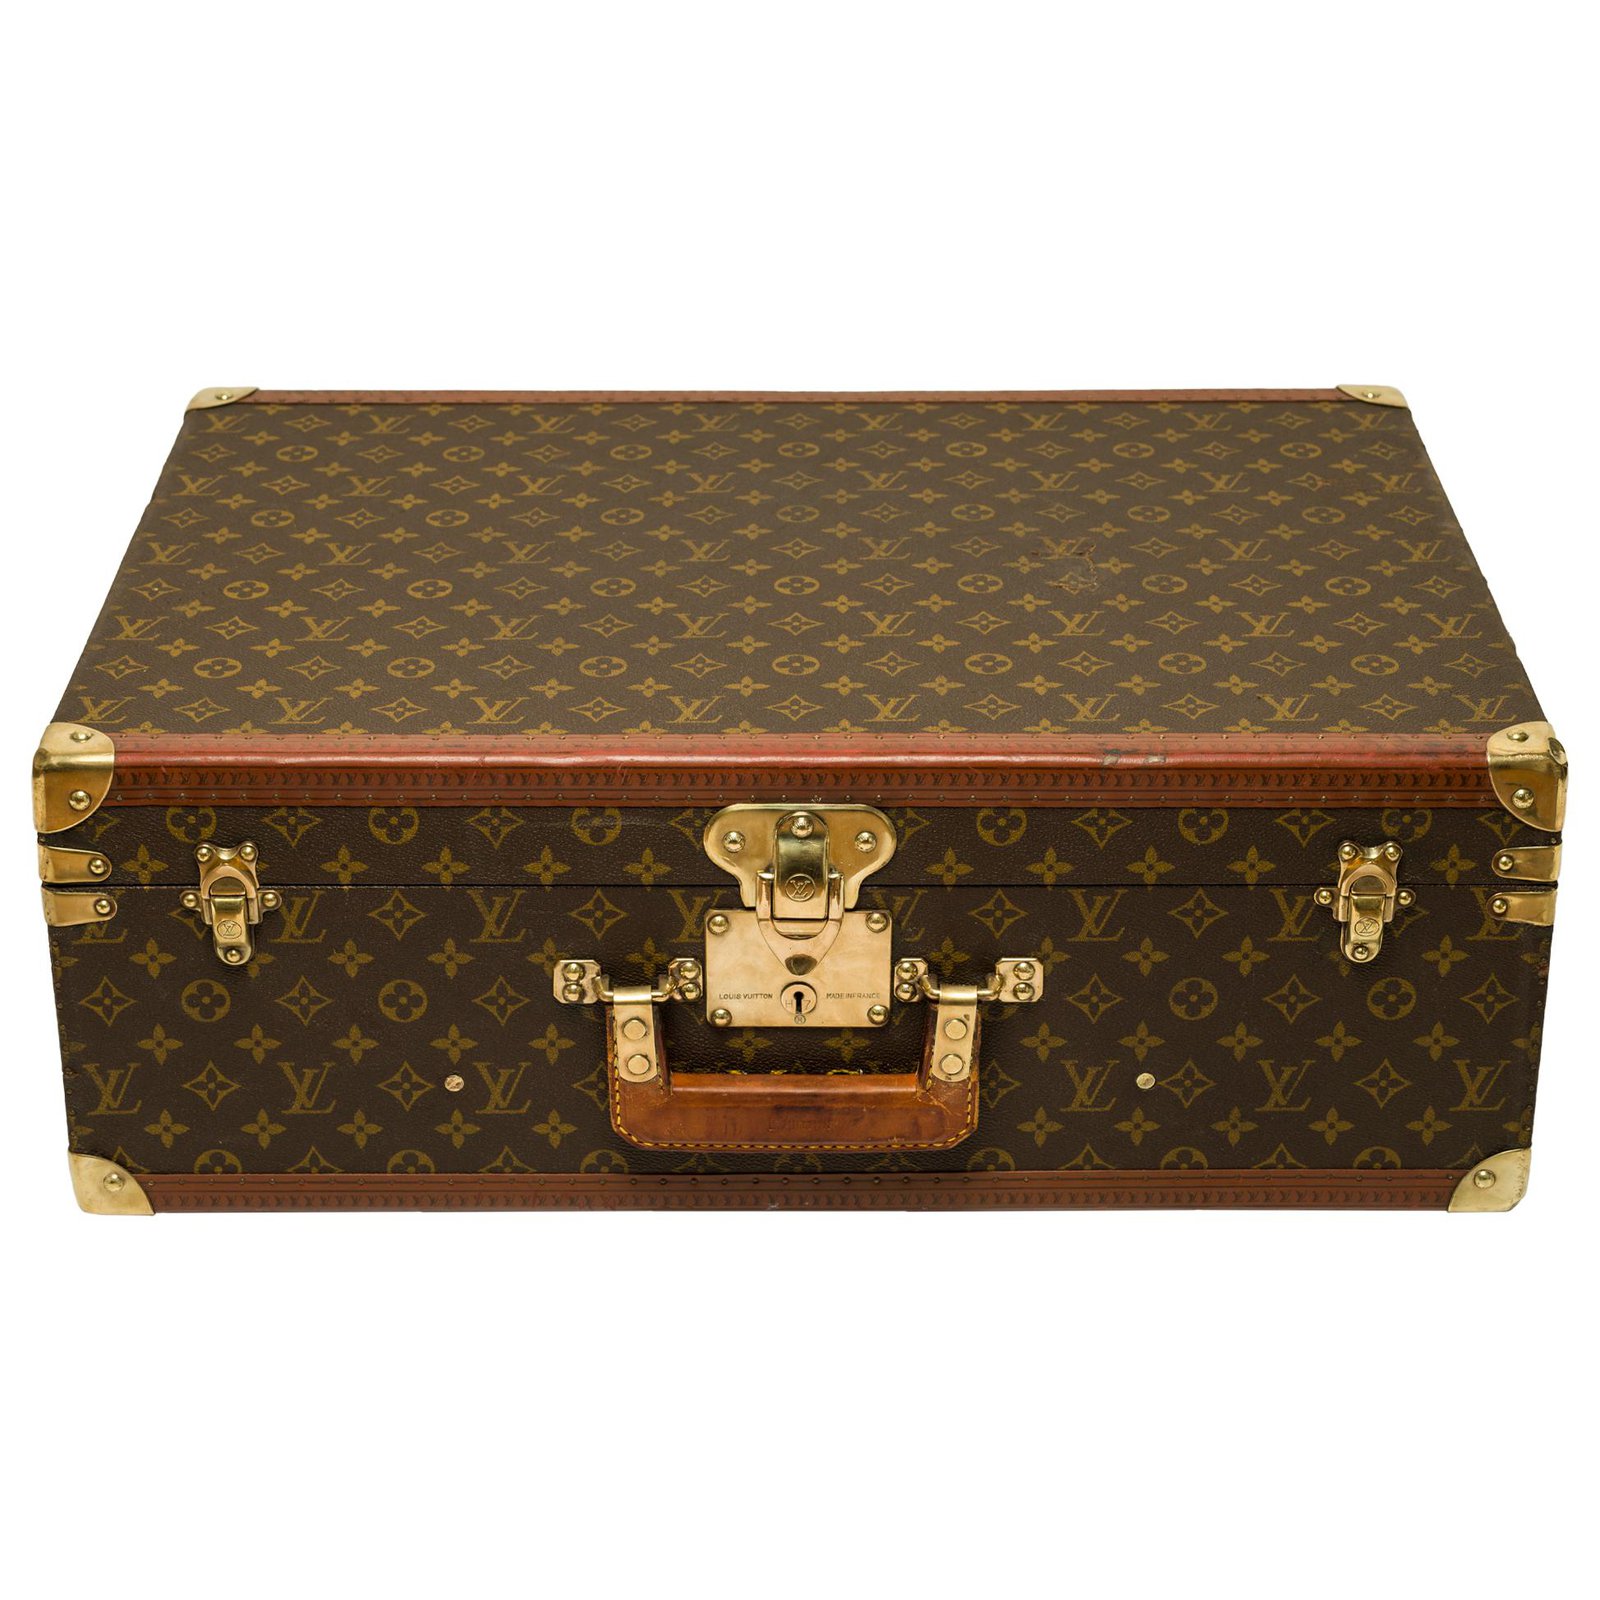 Splendid Luxury Kennel for small dogs from a Louis Vuitton Bisten